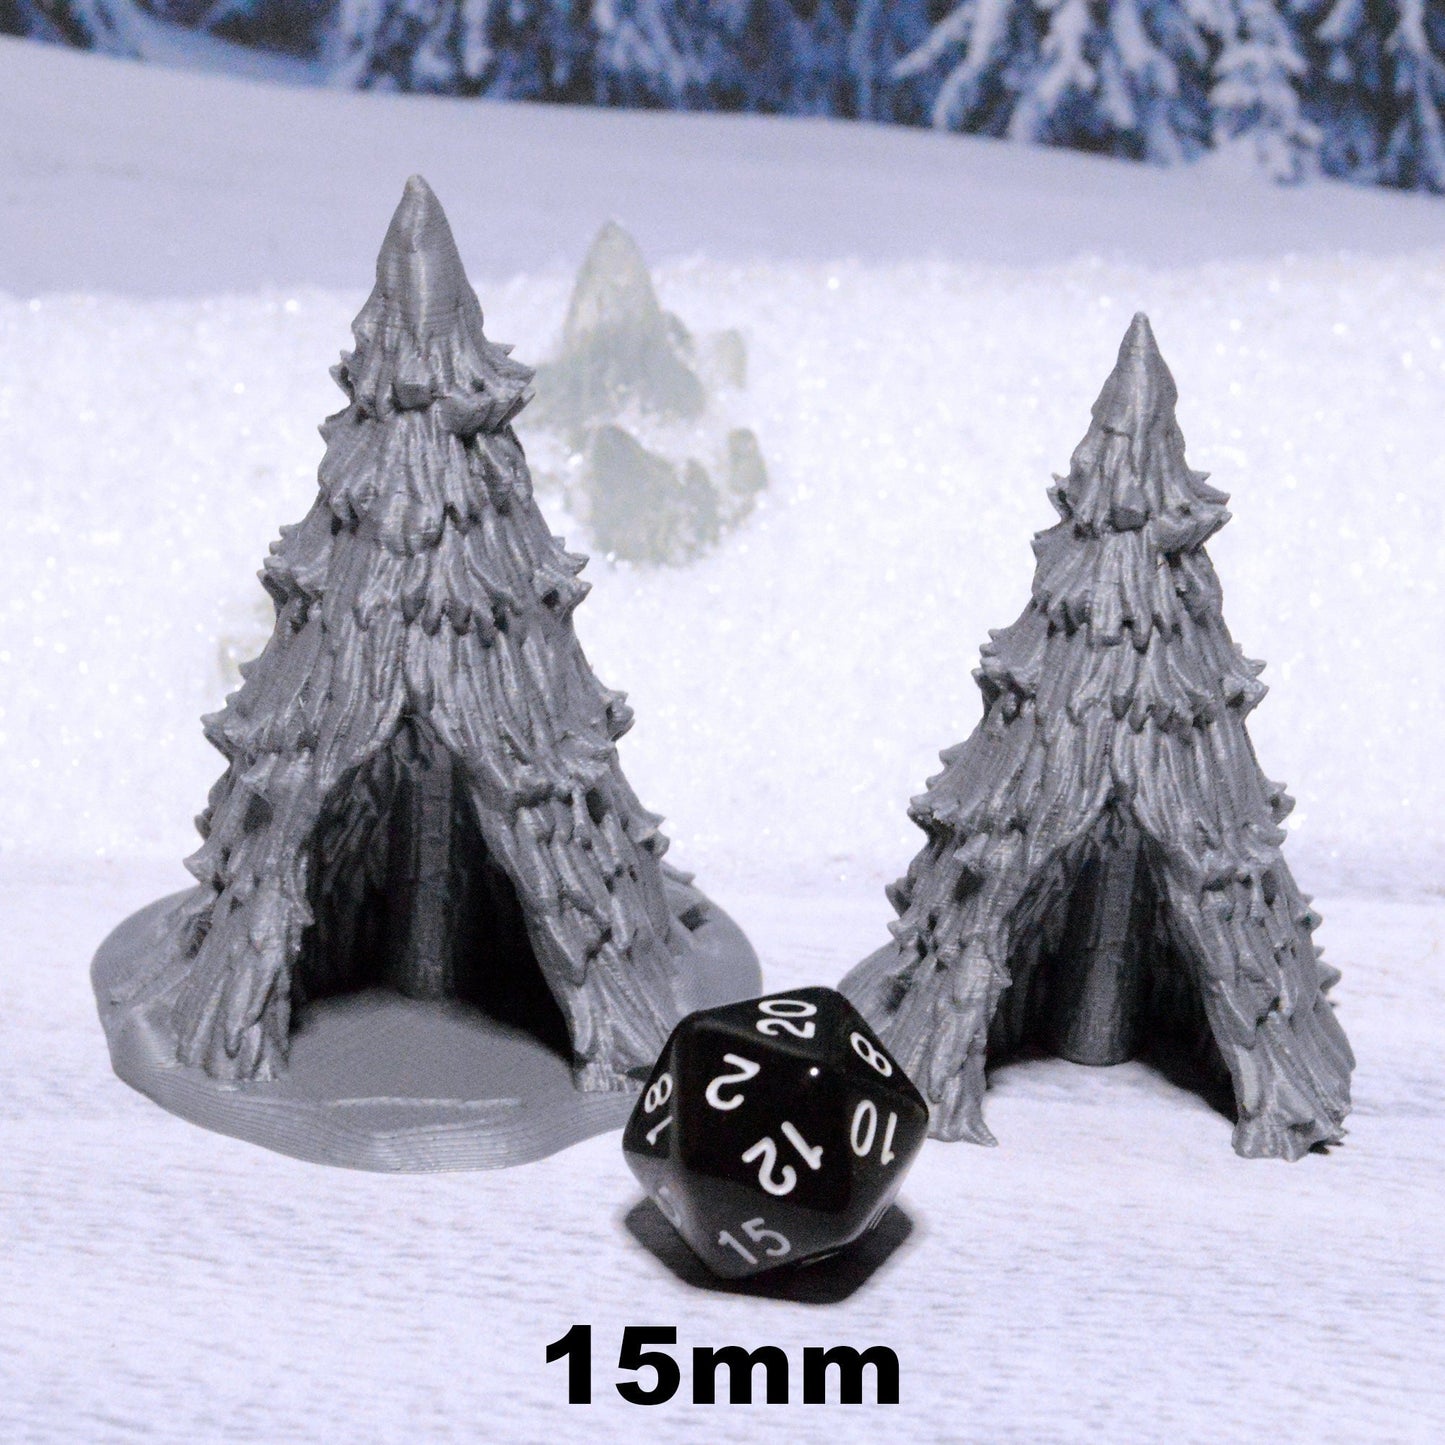 Miniature Shelter Pine Trees 15mm 28mm 32mm for D&D Icewind Dale Terrain, DnD Pathfinder Wargame Frozen Forest